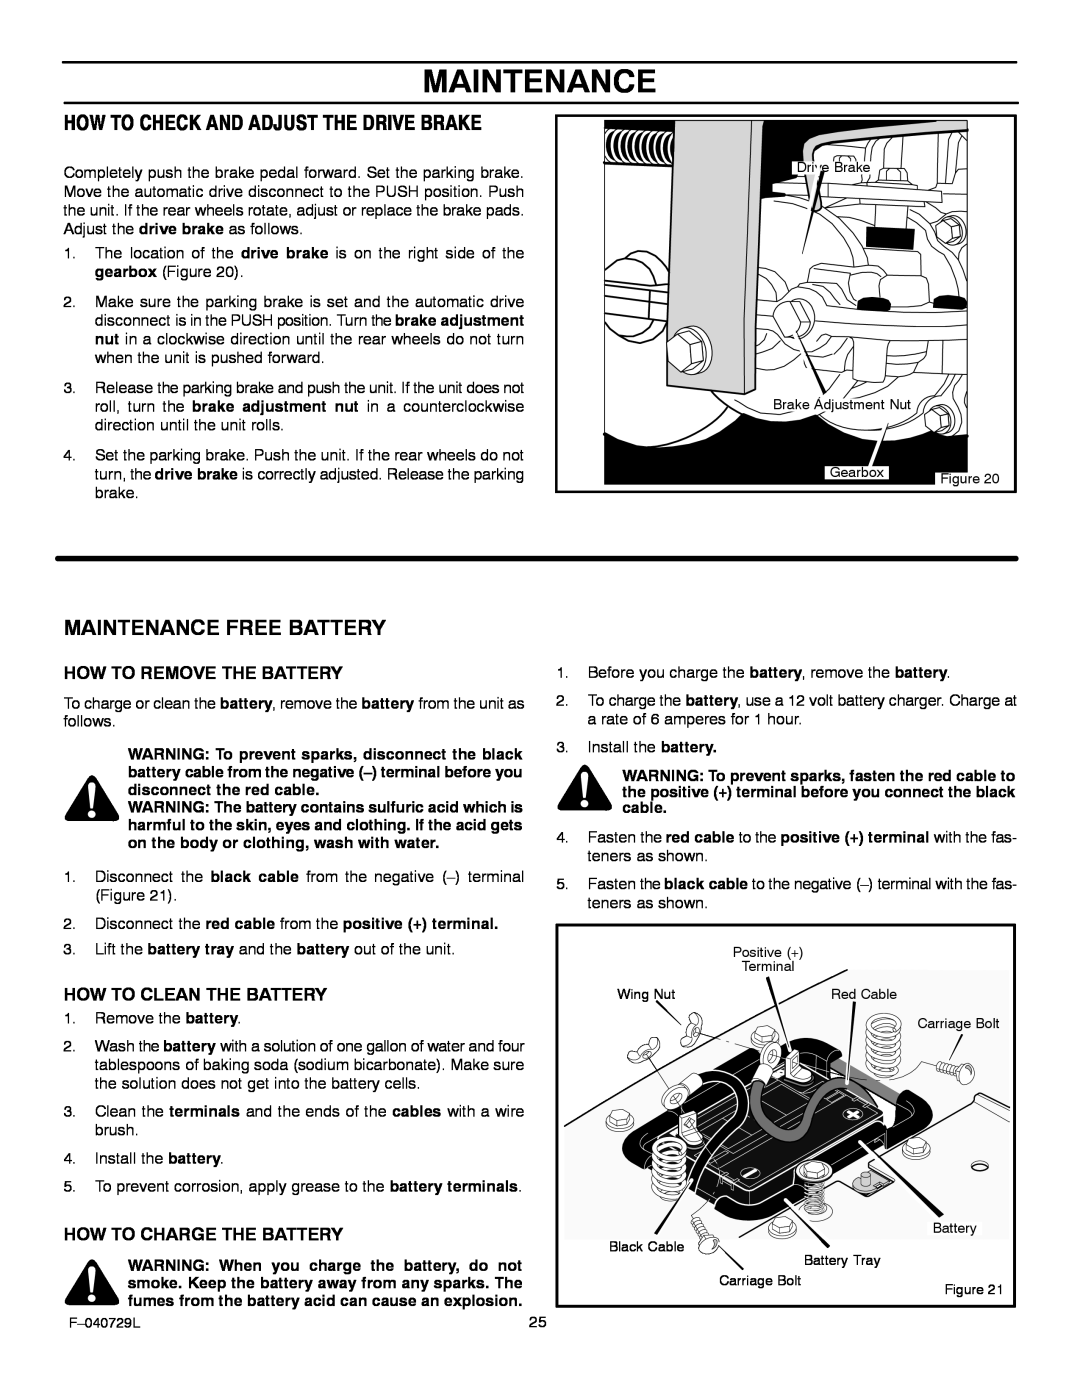 Murray 425620x92A manual How To Check And Adjust The Drive Brake, Maintenance Free Battery, How To Remove The Battery 